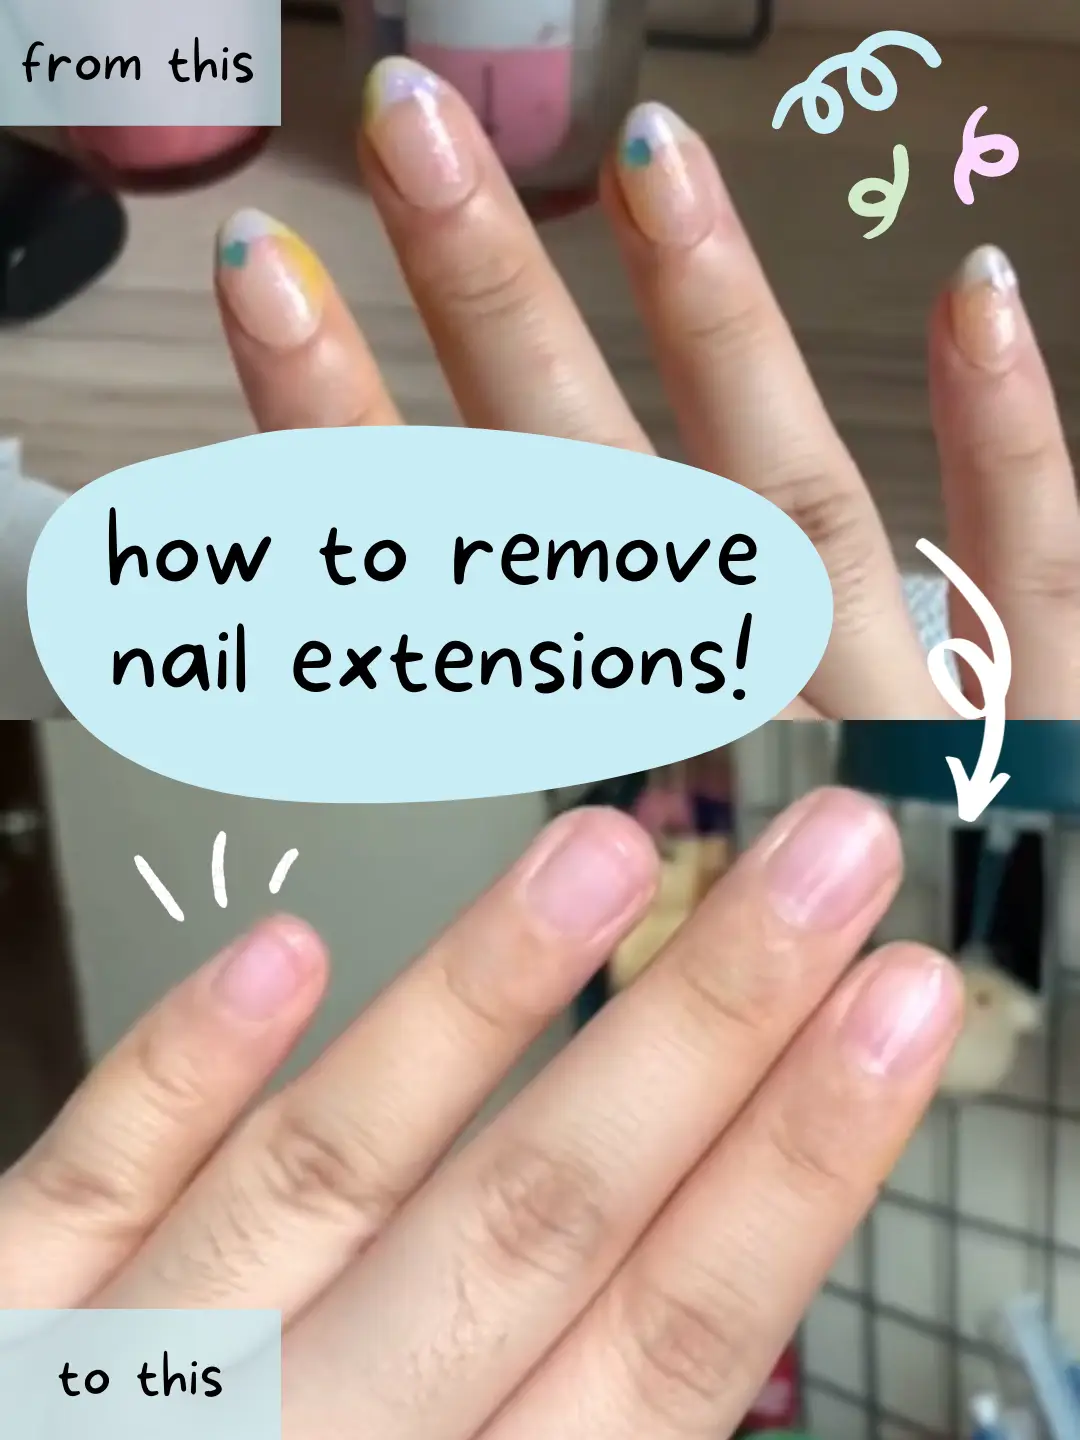 how to remove nail extensions! 💜 | Article posted by farah | Lemon8